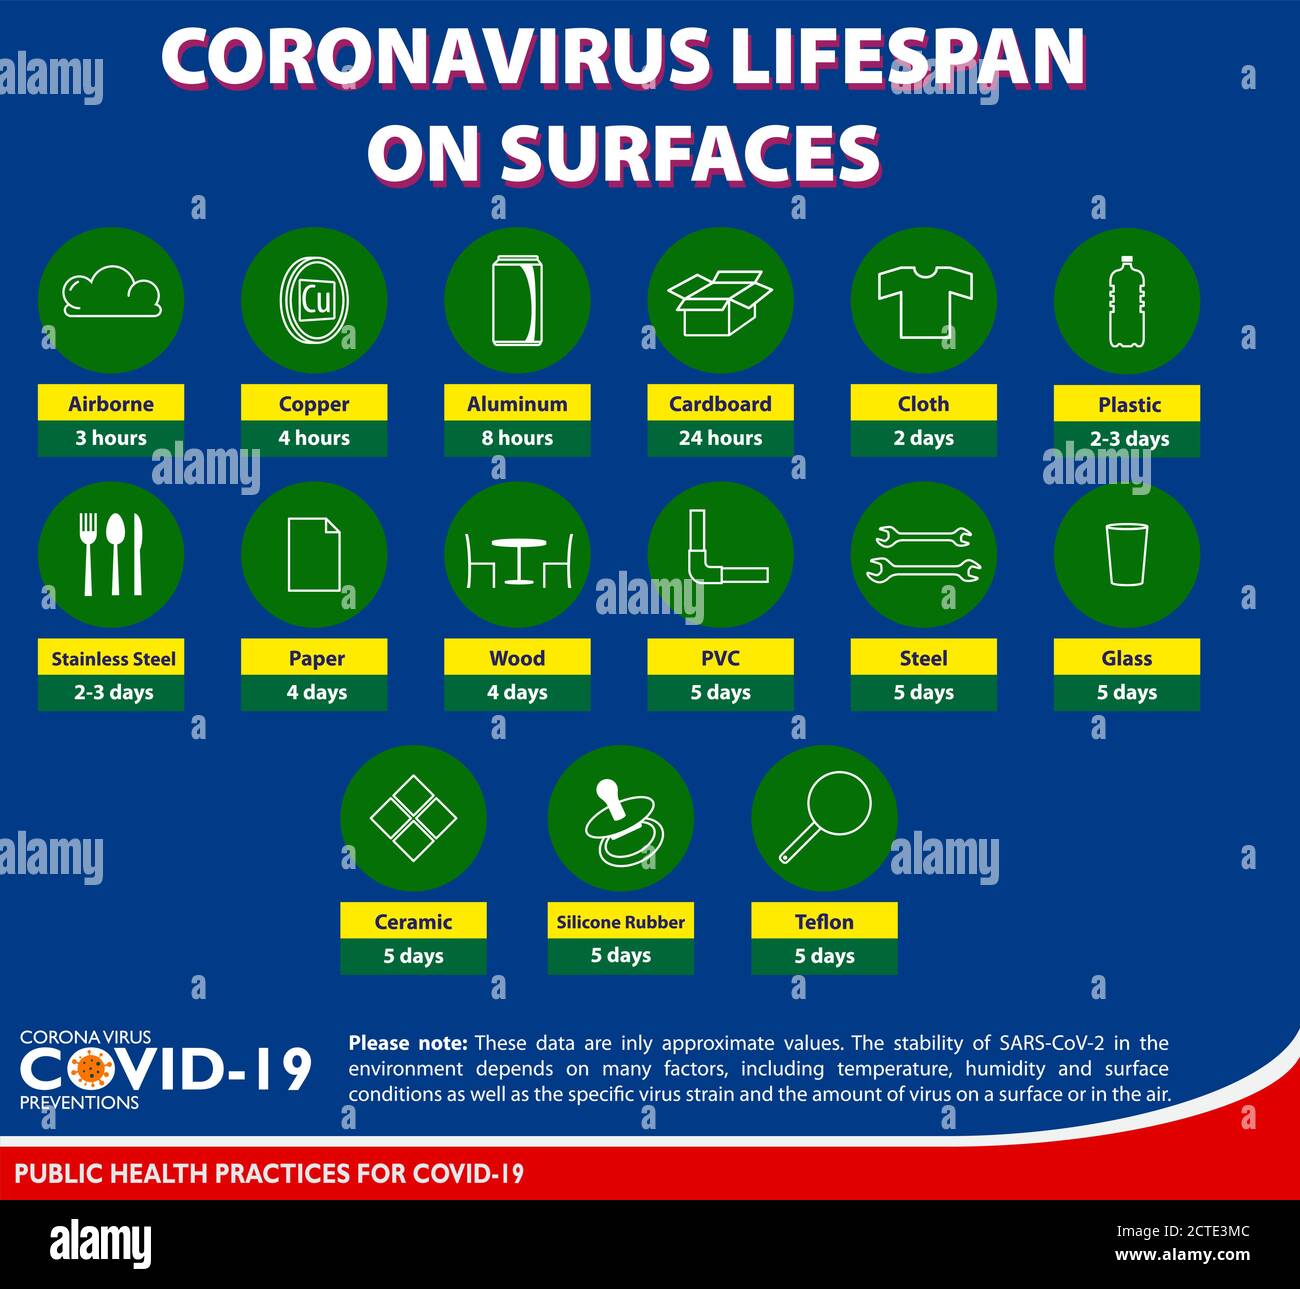 the virus lifespan on surface poster or public health practices for covid-19 or health and safety protocols or new normal lifestyle concept. eps 10 ve Stock Vector